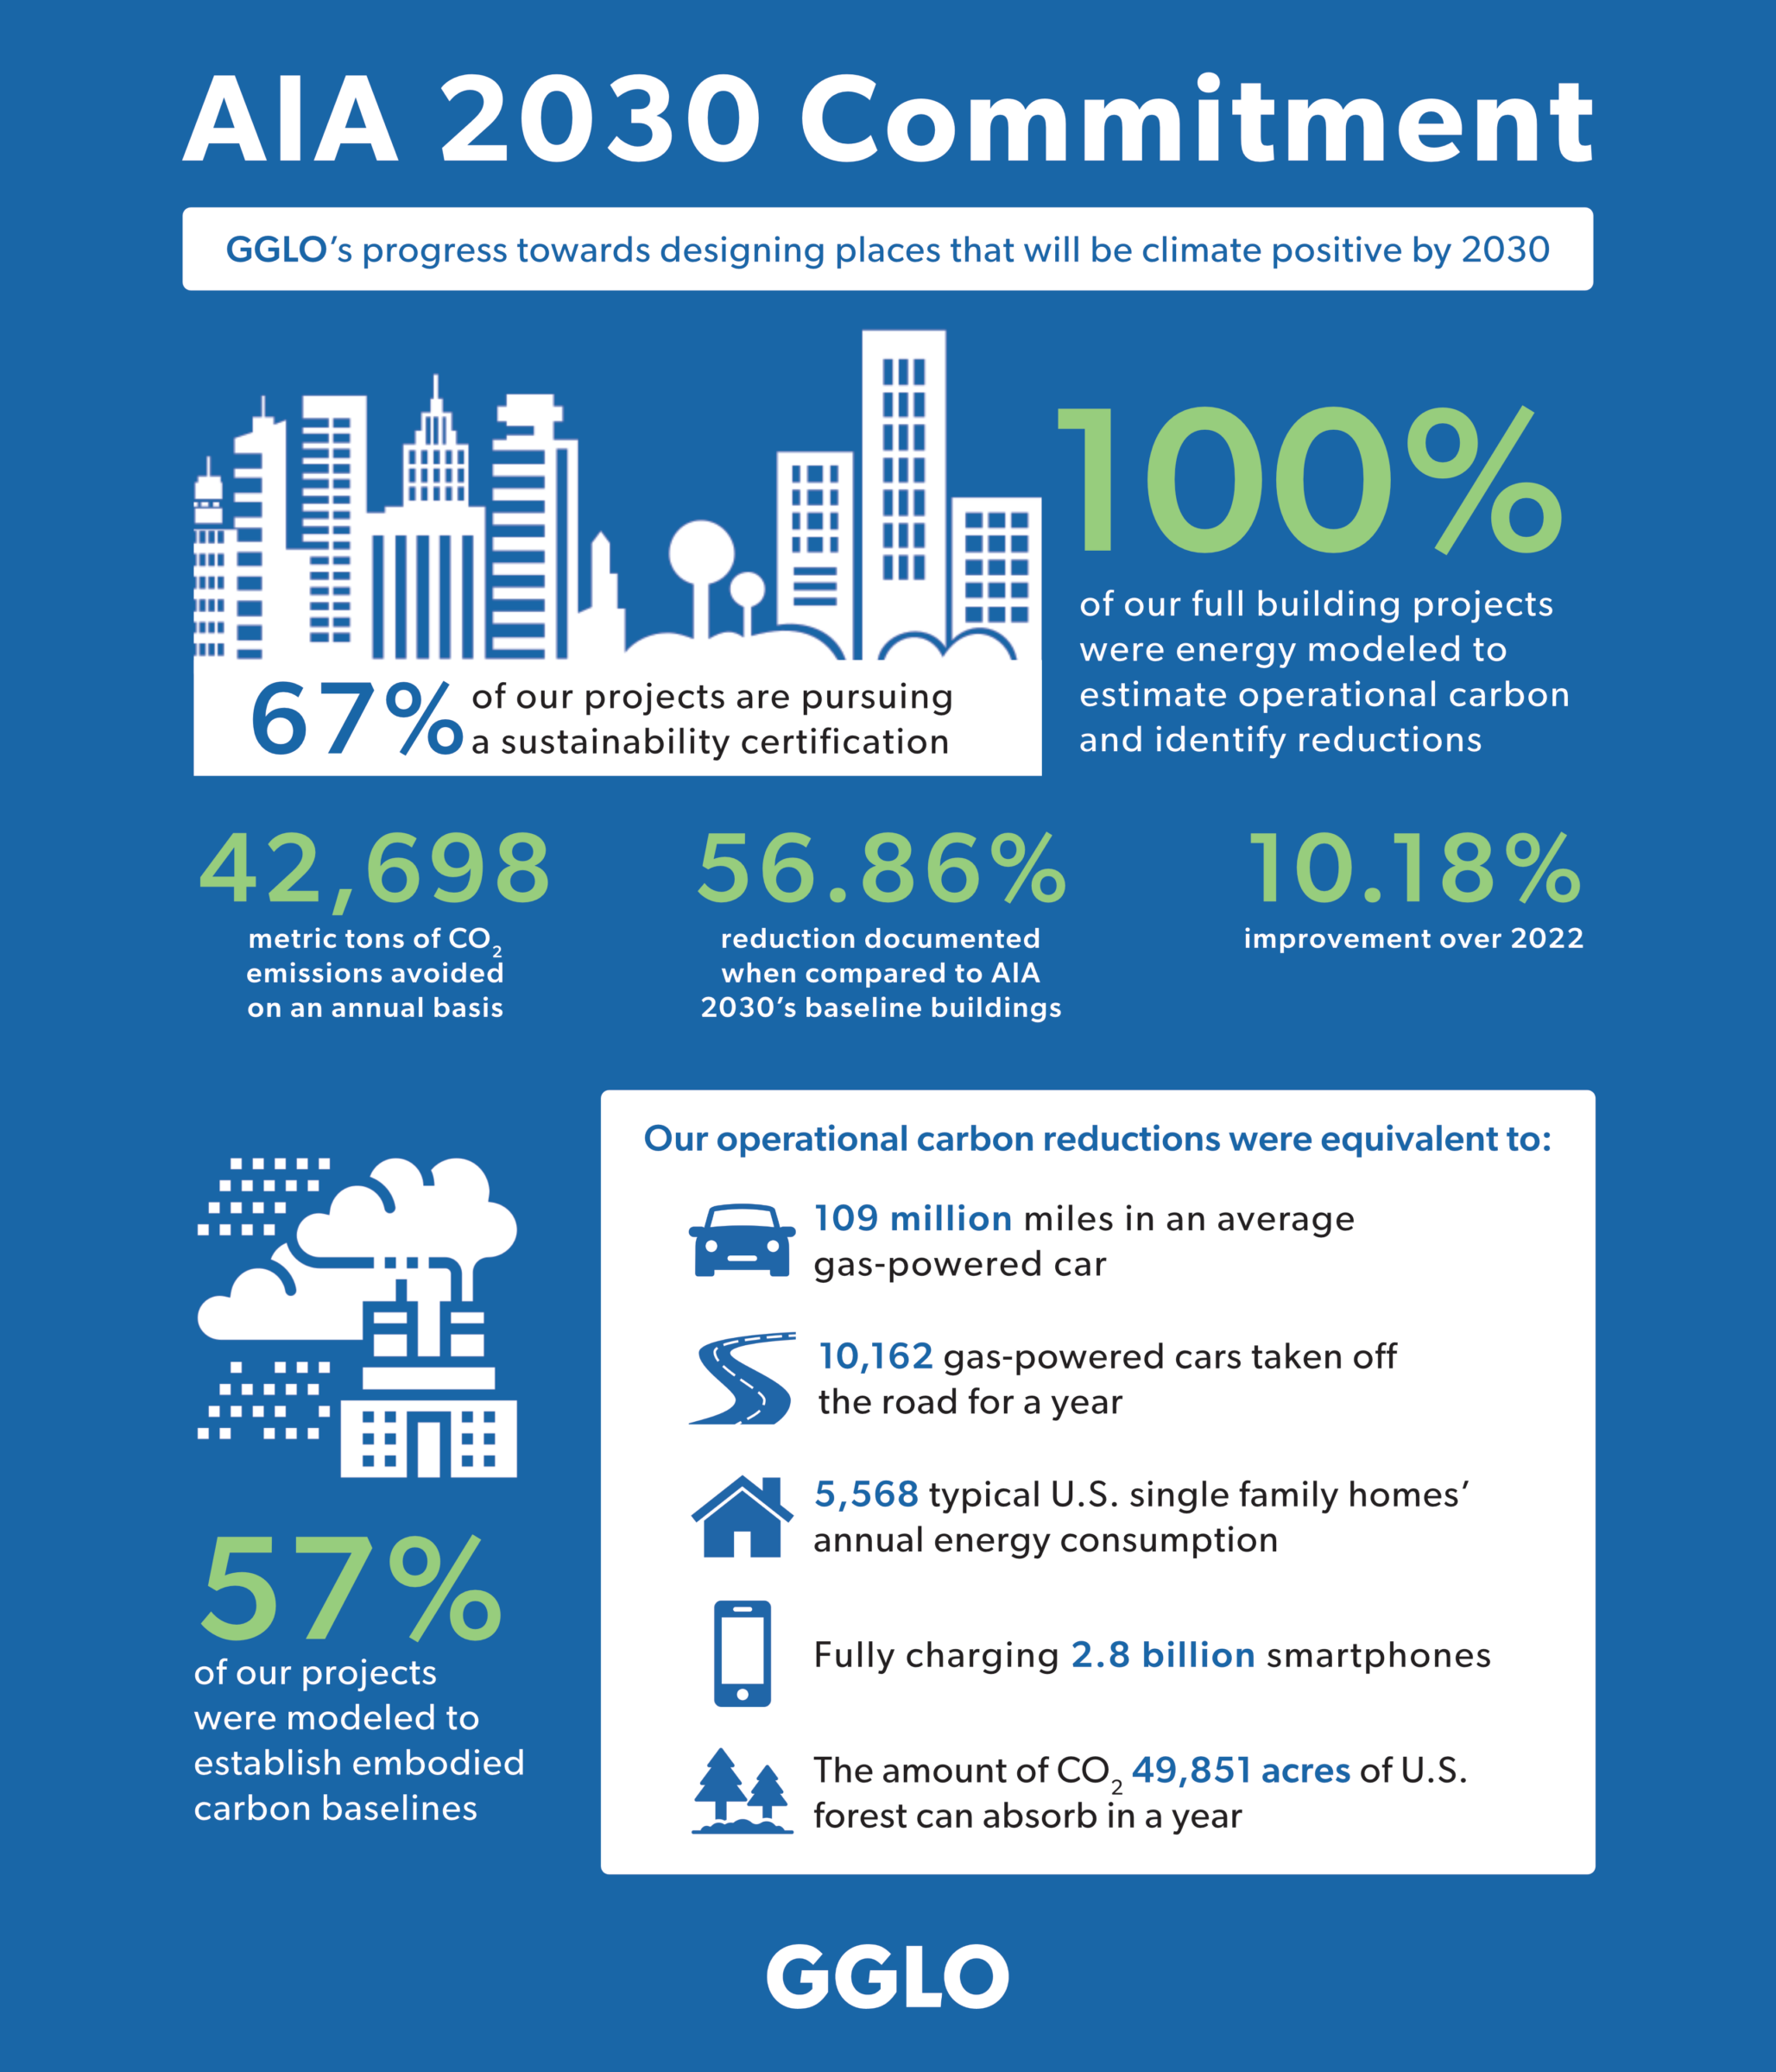 Infographic containing: graphics and text which outlines the GGLO 2030 Commitment and progress towards designing climate positive buildings by 2030. It highlights that 67% of their projects are pursuing sustainability certifications, 100% of full building projects were energy modeled, resulting in a 56.86% reduction compared to their 2030 baseline, a 10.18% improvement over 2022. Their operational carbon reductions equate to emissions from 109 million miles driven by an average gas-powered car, or over 10,000 cars taken off the road for a year. Their reductions also equate to the annual energy consumption of 5,568 U.S. homes, fully charging 2.8 billion smartphones, and offsetting CO2 absorption of 49,851 acres of U.S. forest for a year. The metrics show 42,698 metric tons of CO2 emissions avoided annually, and 57% of projects established embodied carbon baselines.